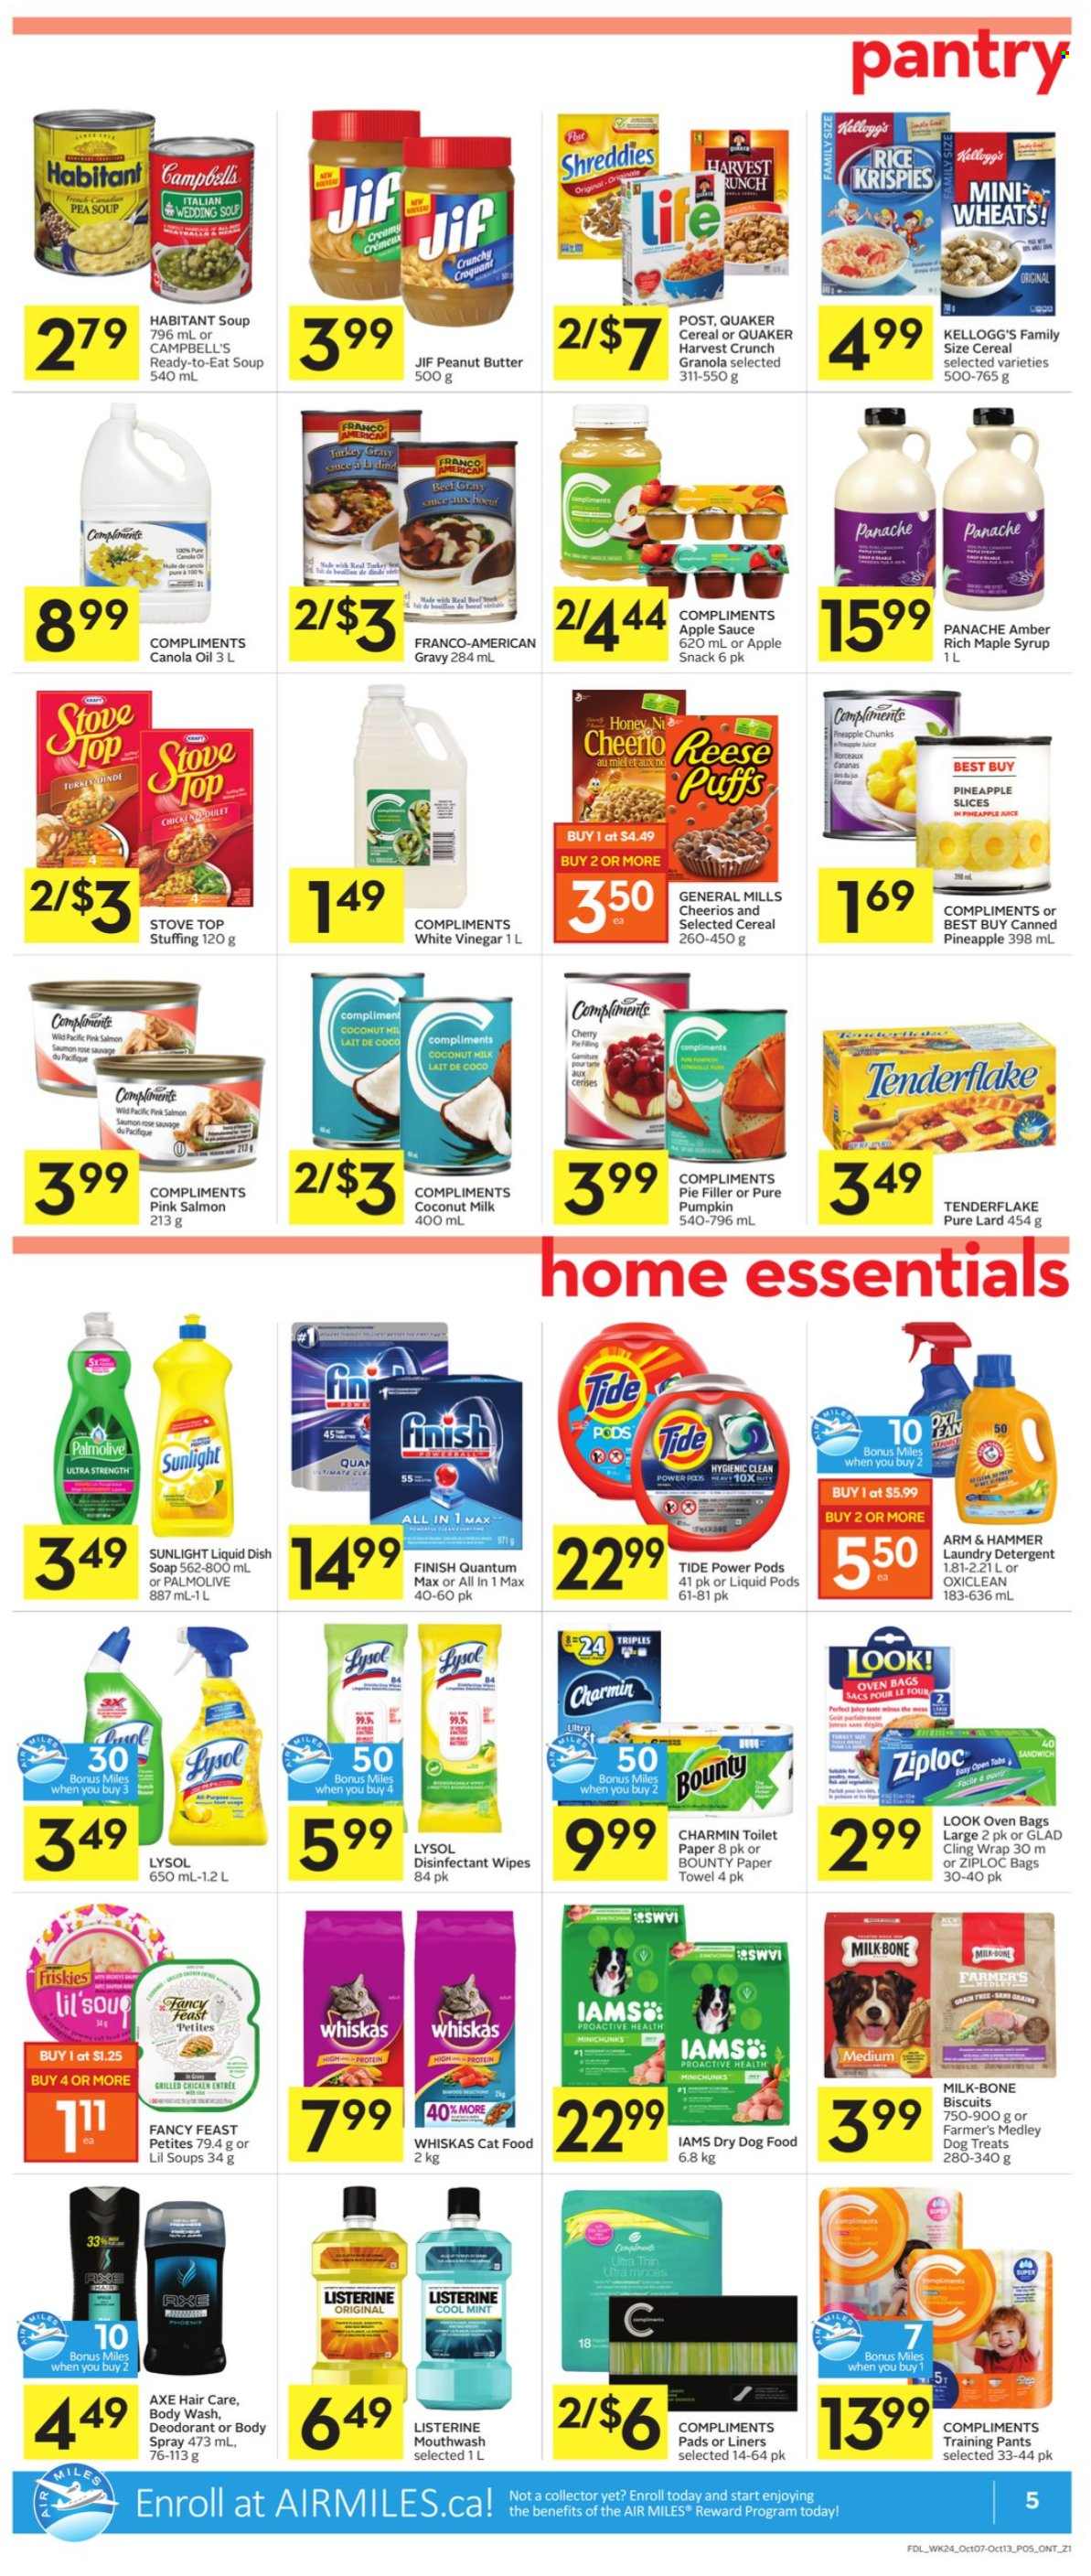 thumbnail - Foodland Flyer - October 07, 2021 - October 13, 2021 - Sales products - pie, puffs, pumpkin, pineapple, Campbell's, sandwich, soup, Quaker, snack, Bounty, Kellogg's, biscuit, ARM & HAMMER, coconut milk, cereals, Cheerios, Rice Krispies, canola oil, vinegar, oil, apple sauce, maple syrup, honey, peanut butter, syrup, Jif, L'Or, rosé wine, detergent, granola, lard, Listerine, Whiskas, desinfection, deodorant. Page 5.